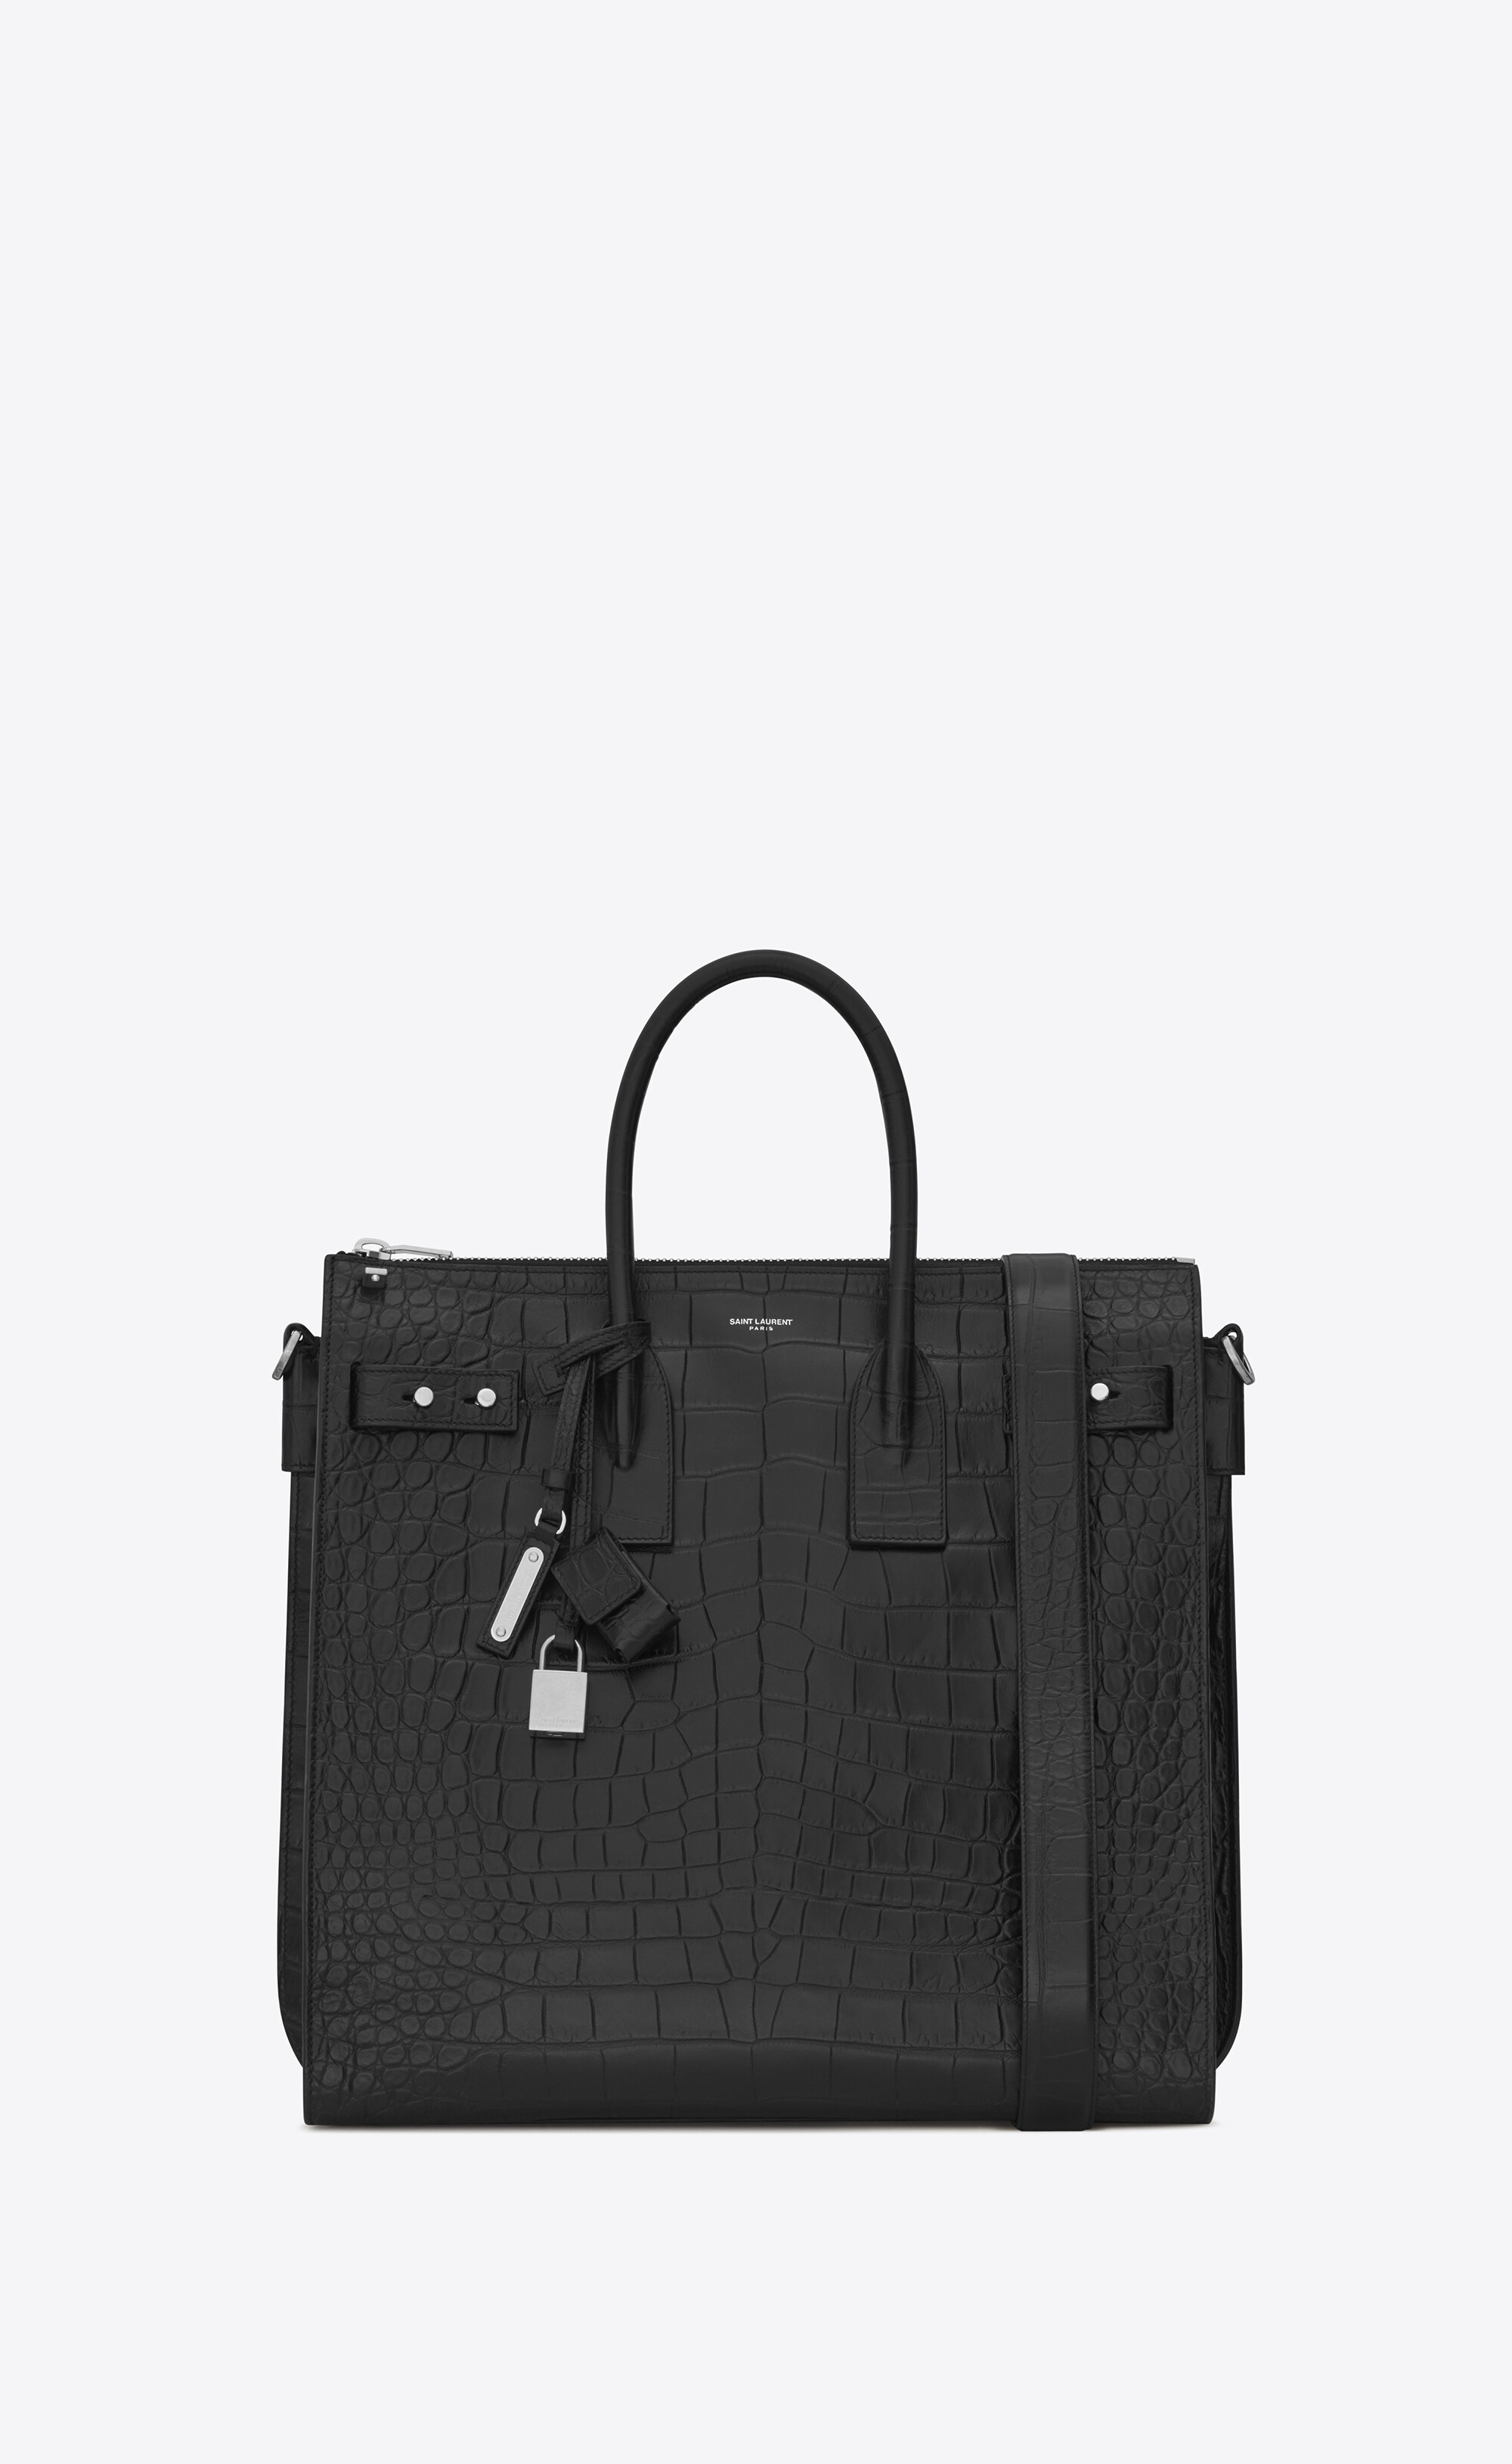 Sac de jour north/south tote in CROCODILE-EMBOSSED leather | Saint ...